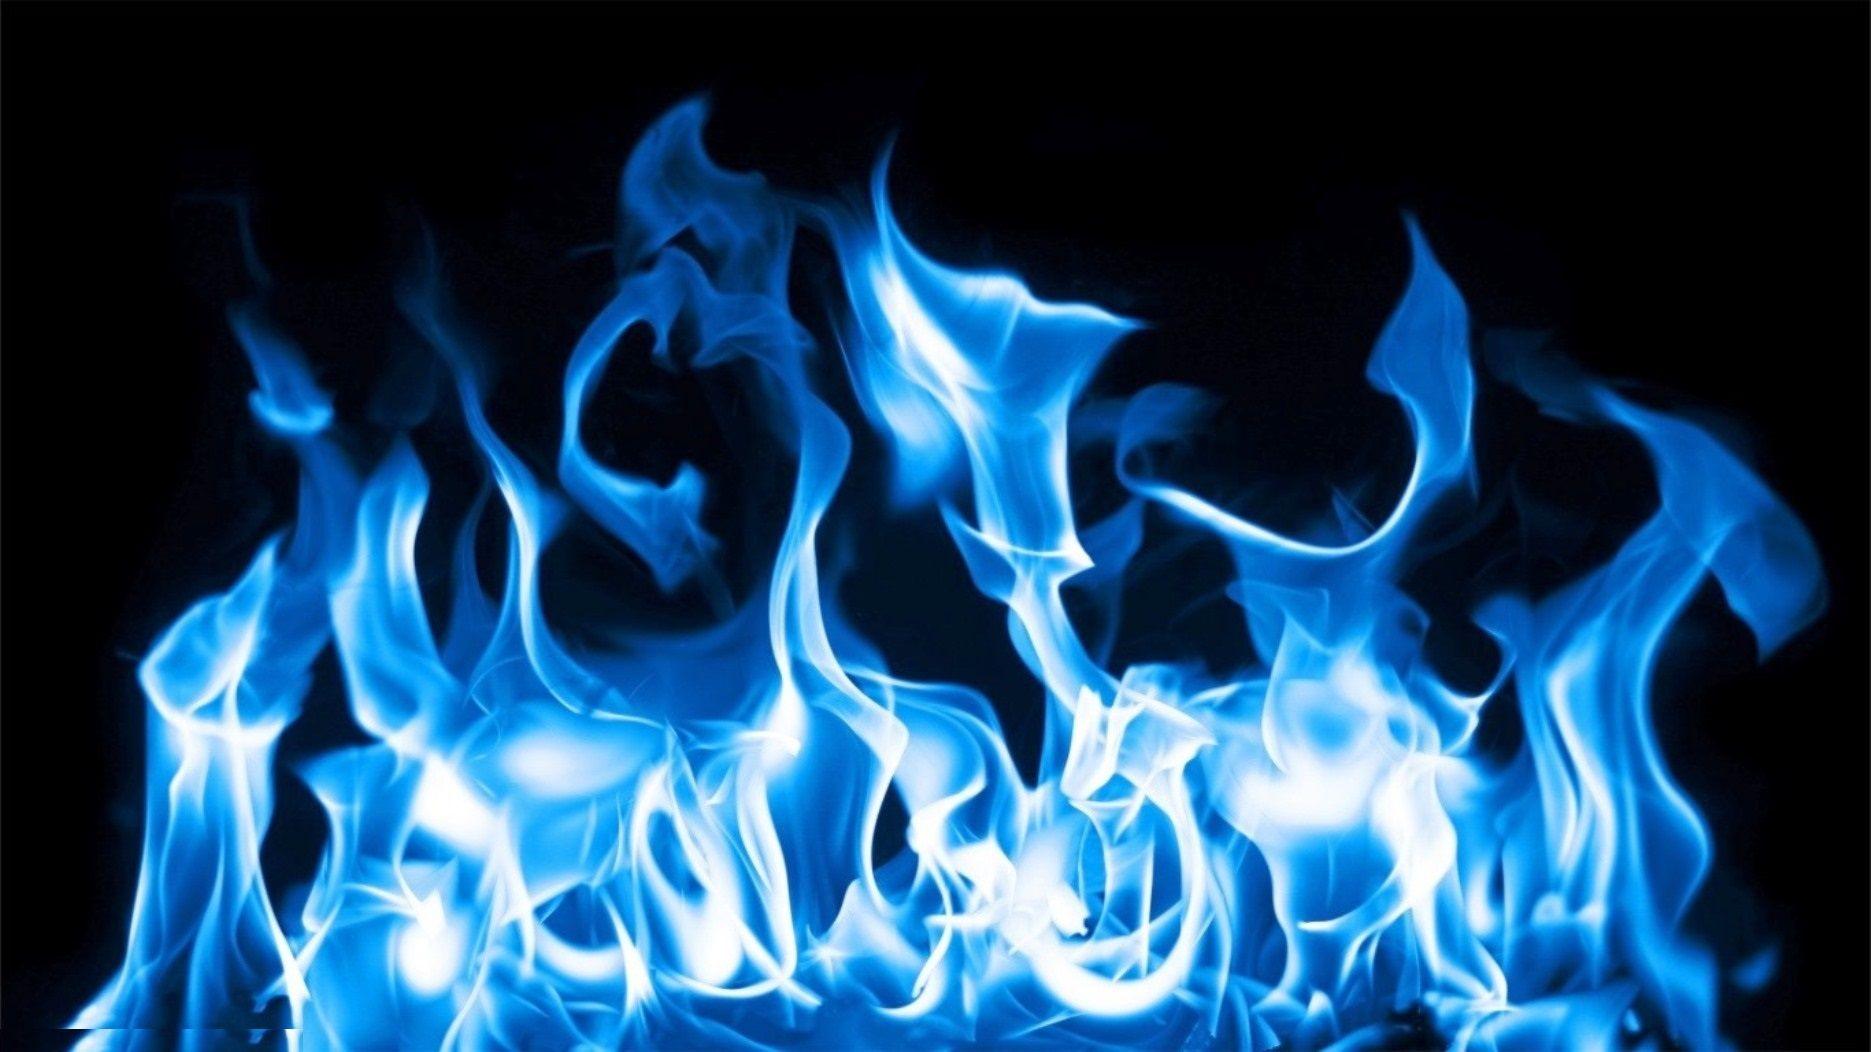 blue fire wallpaper 1920×1080. Background Check All